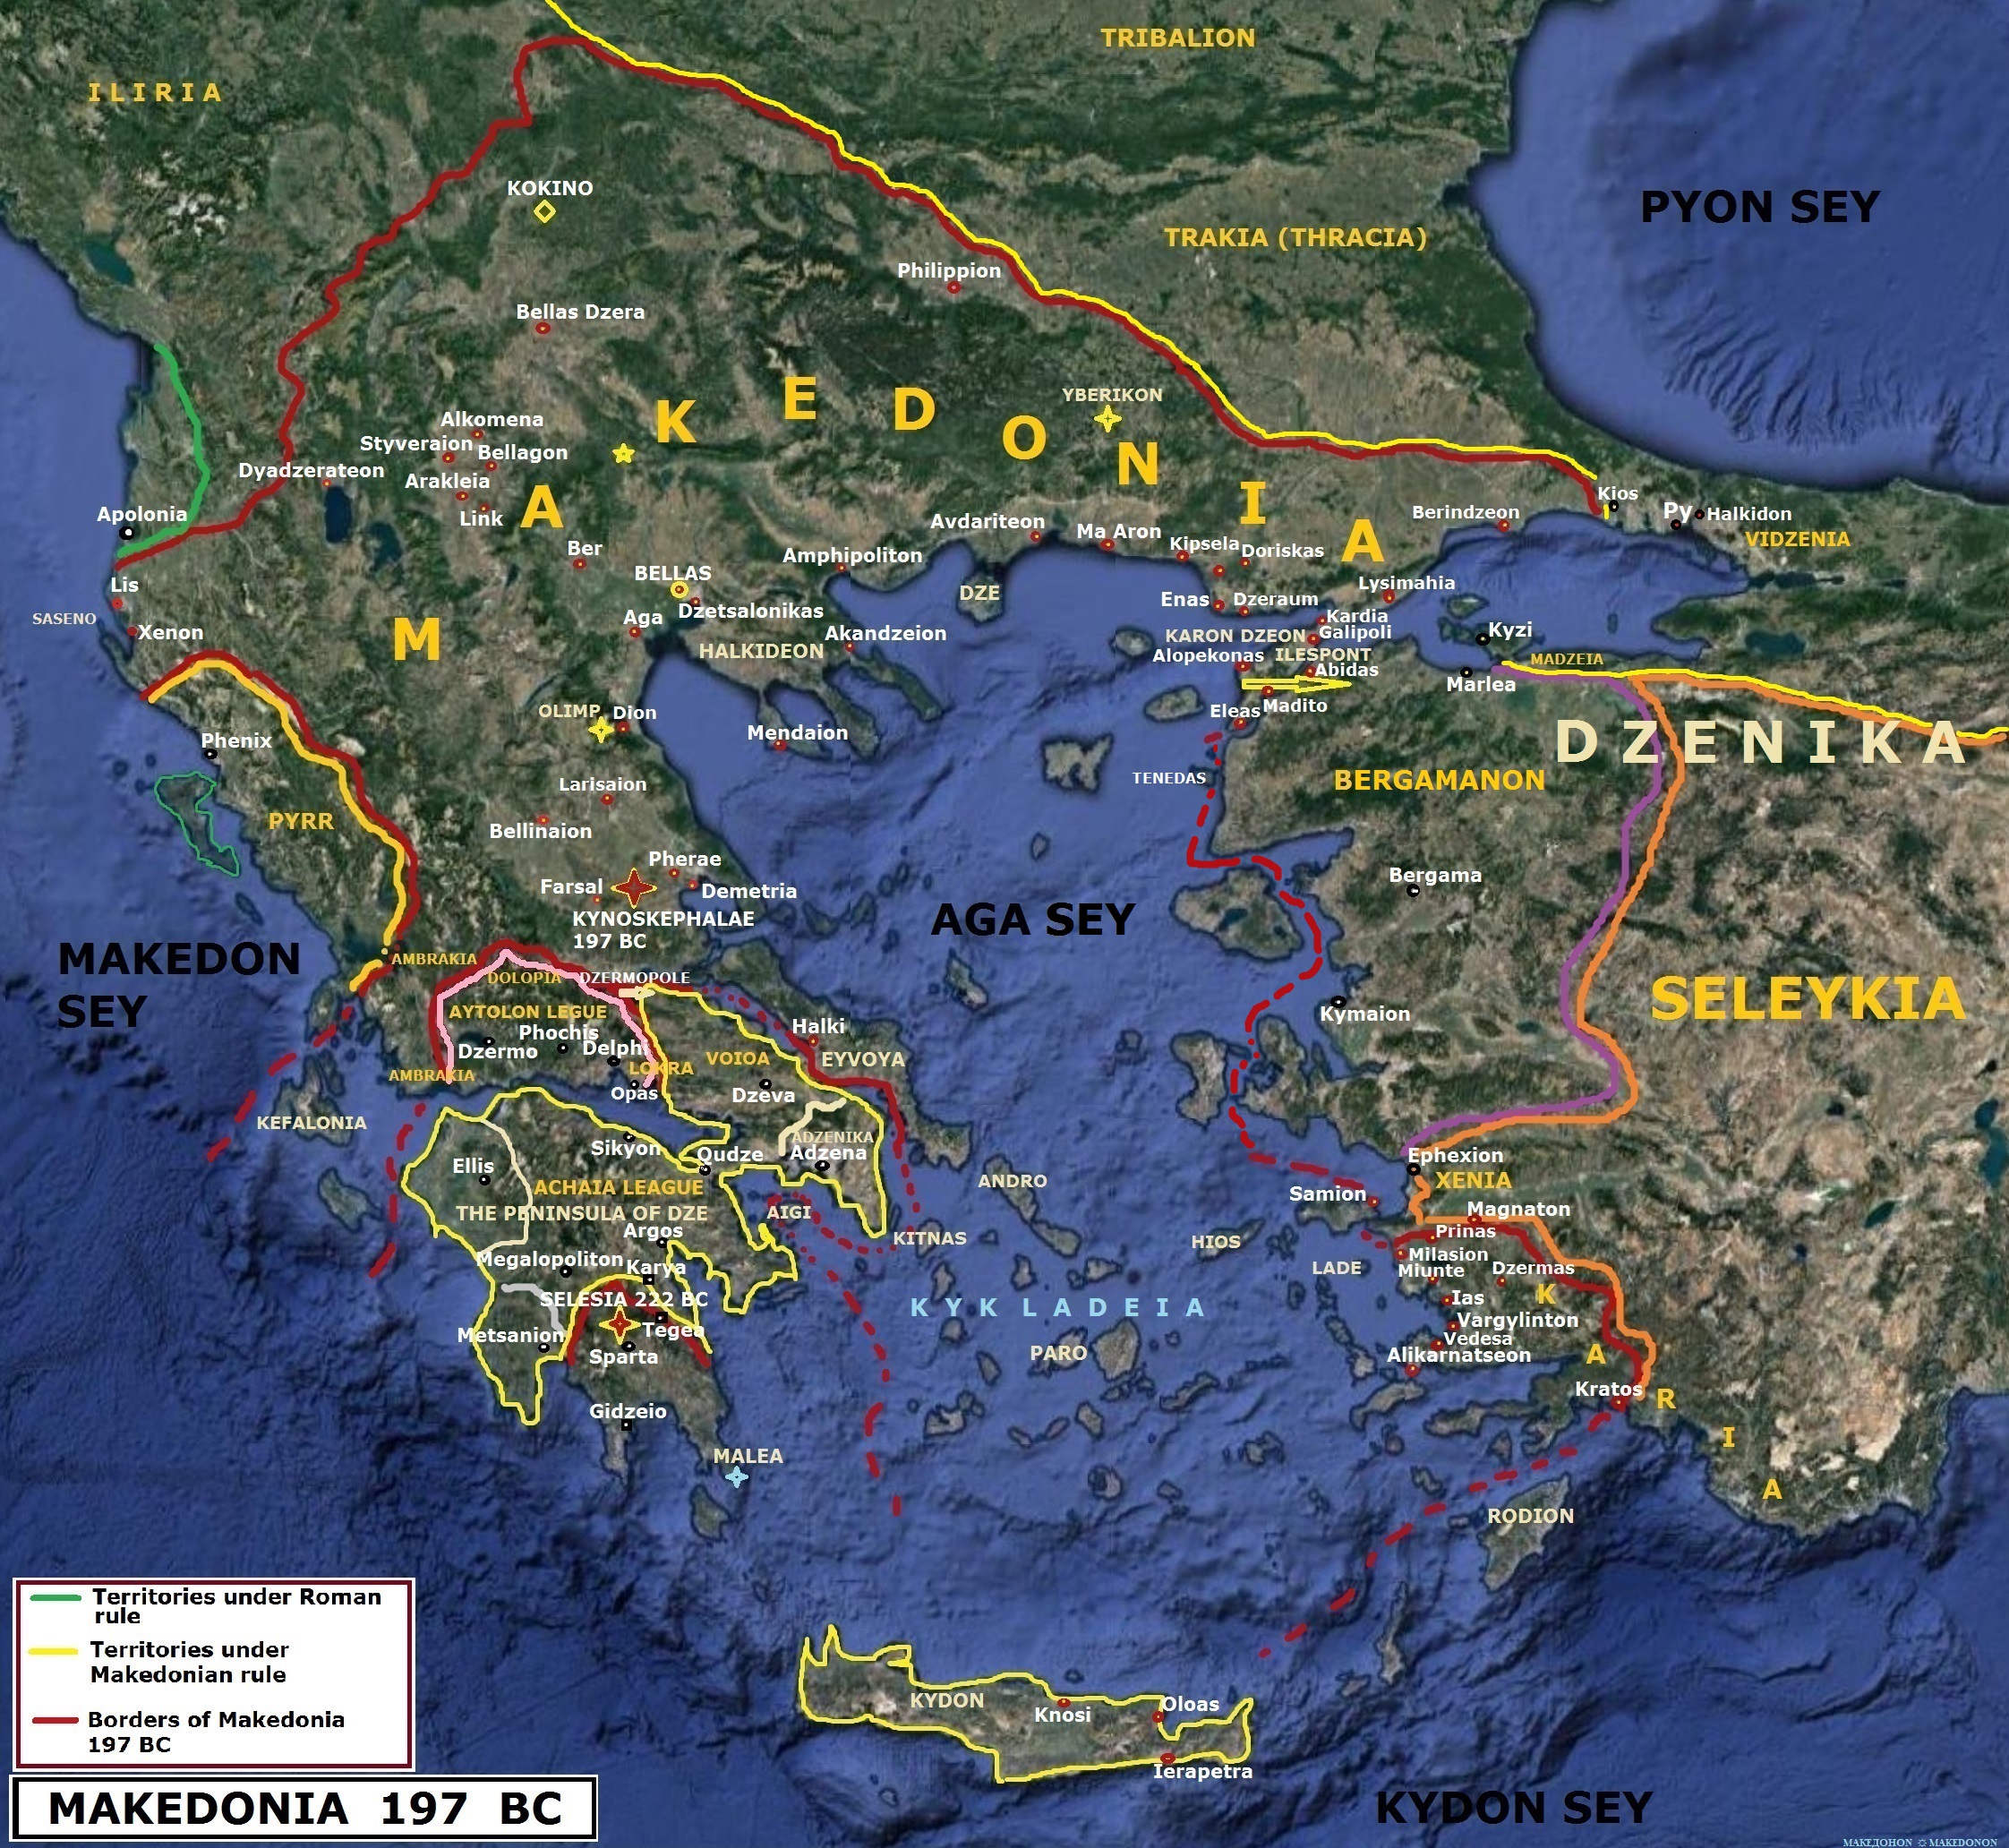 MAKEDONIA 197 BC AND POLITICAL RELATIONS